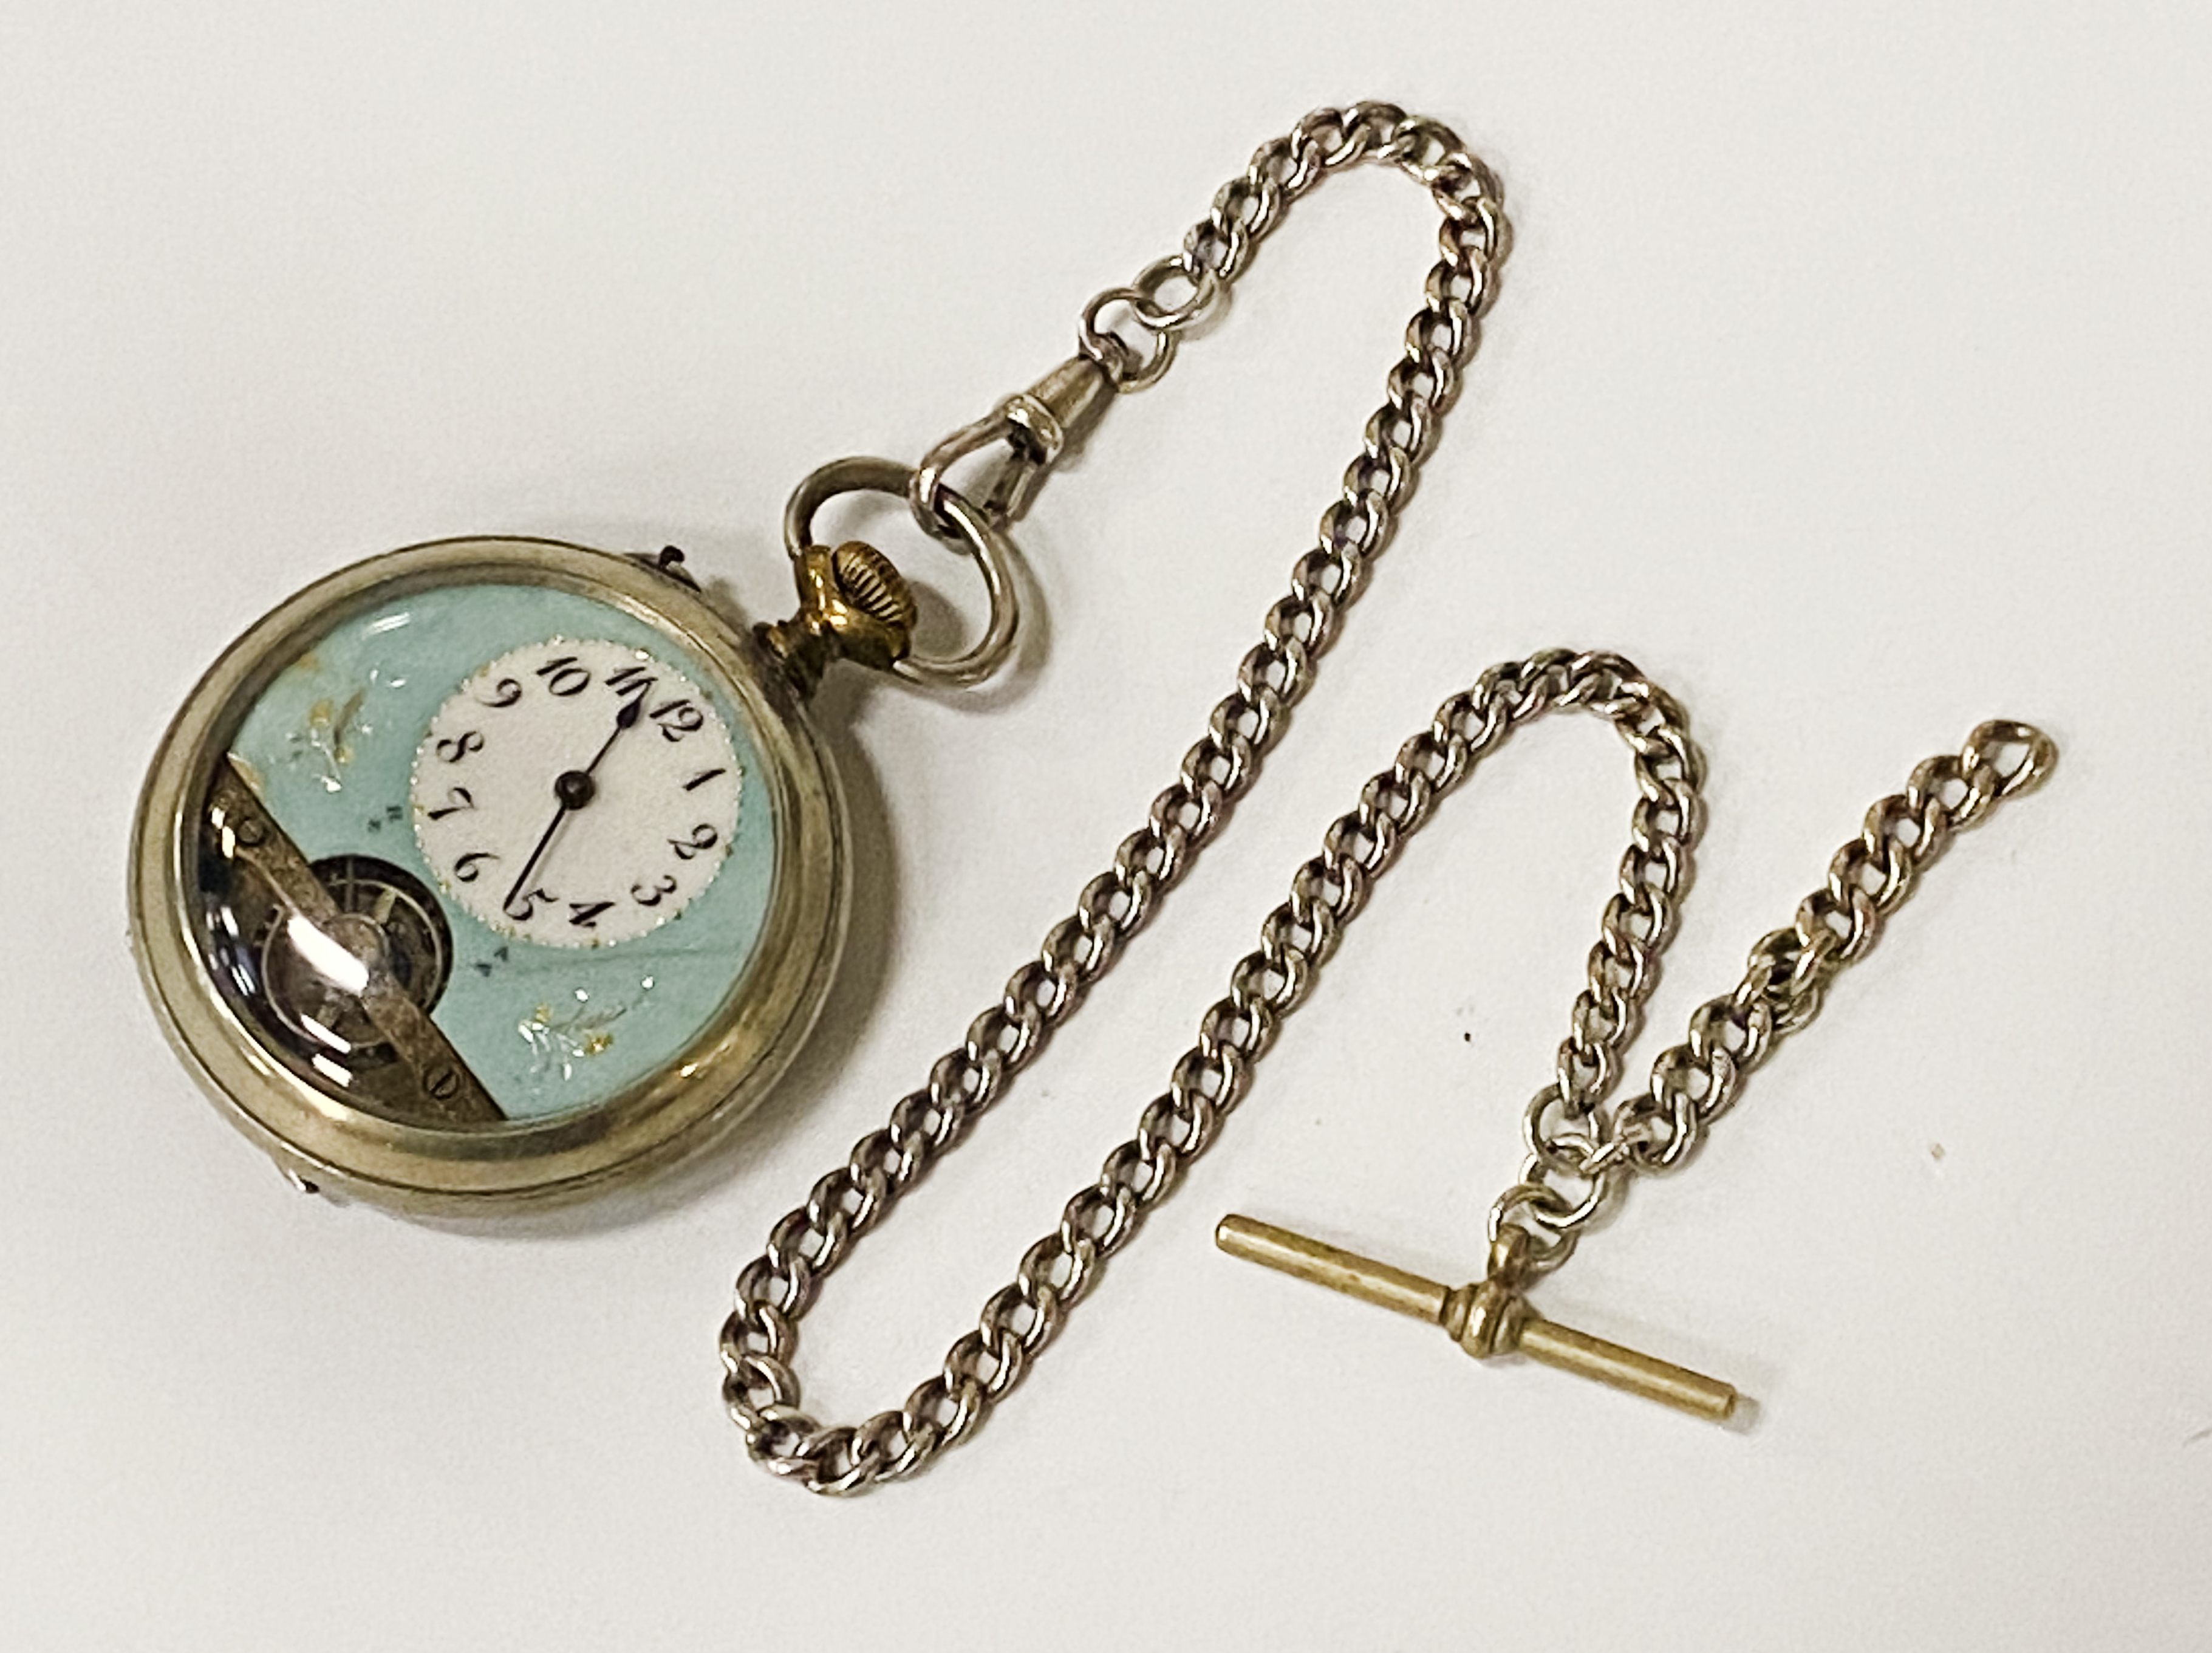 HEBDOMAS 8 DAY POCKET WATCH WITH ALBERT CHAIN A/F